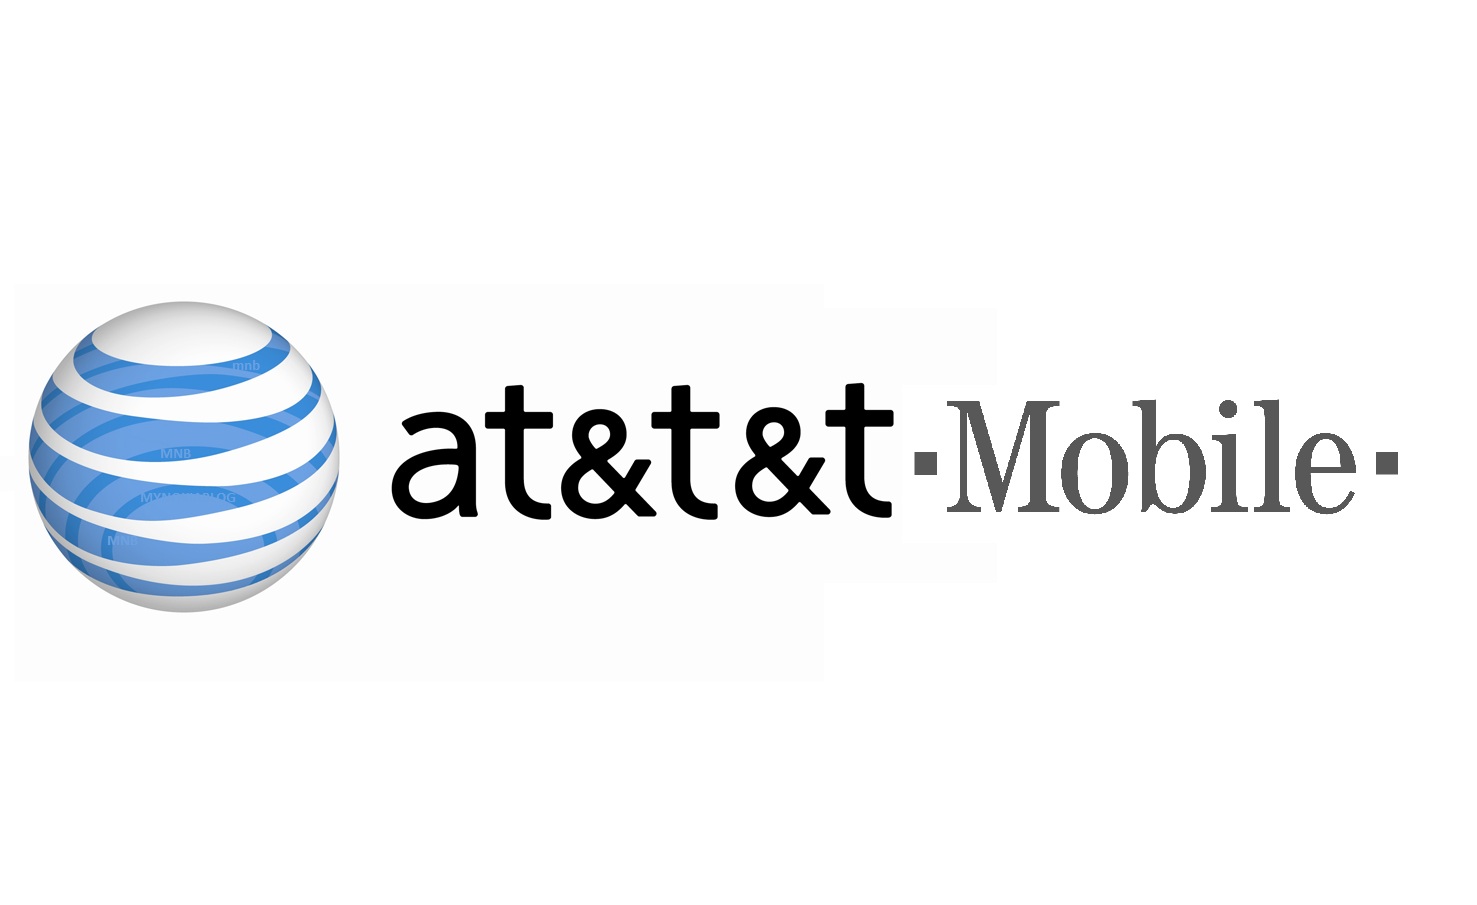 WHICH IS BETTER AT&T OR T-MOBILE